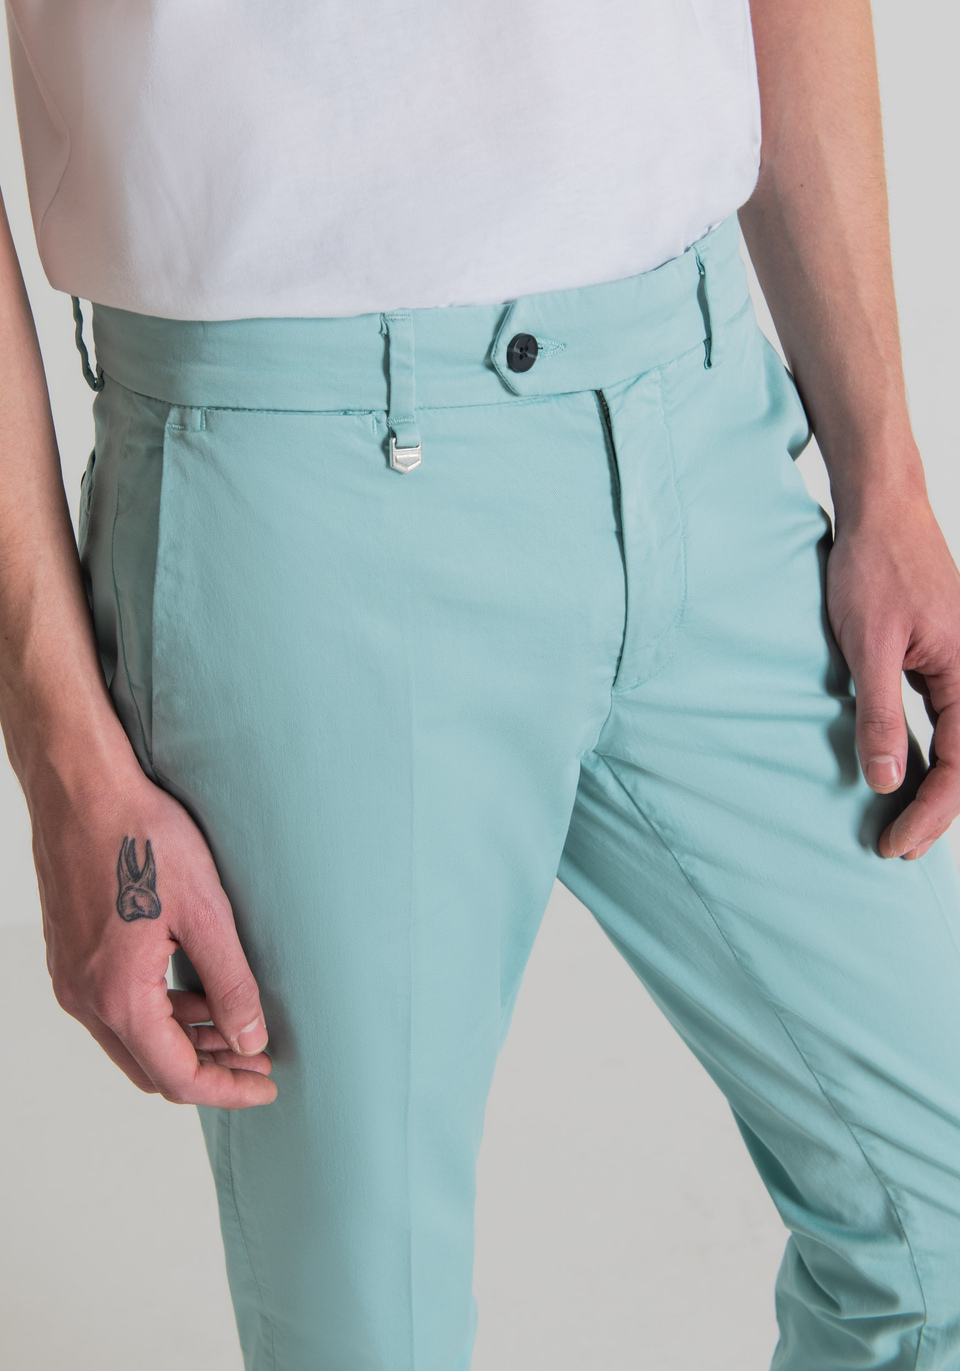 "BRYAN" SKINNY-FIT TROUSERS IN STRETCH COTTON TWILL - Antony Morato Online Shop